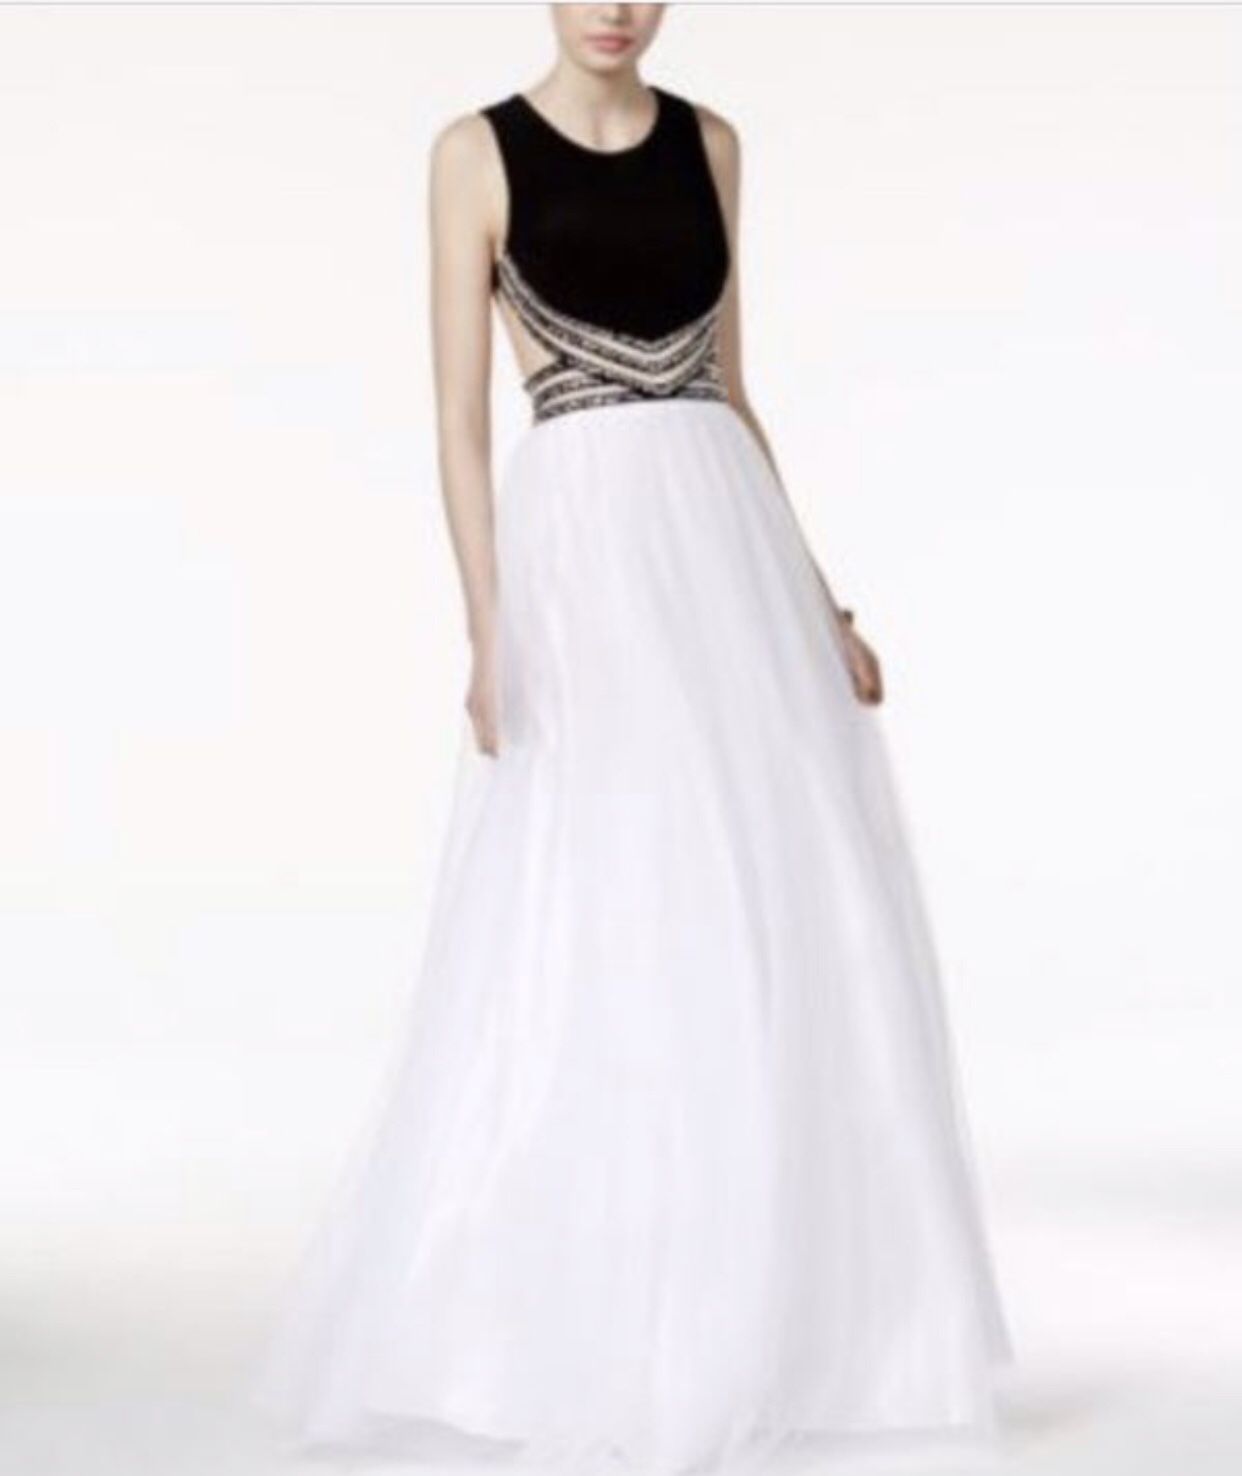 Prom Dress (Blk and White)